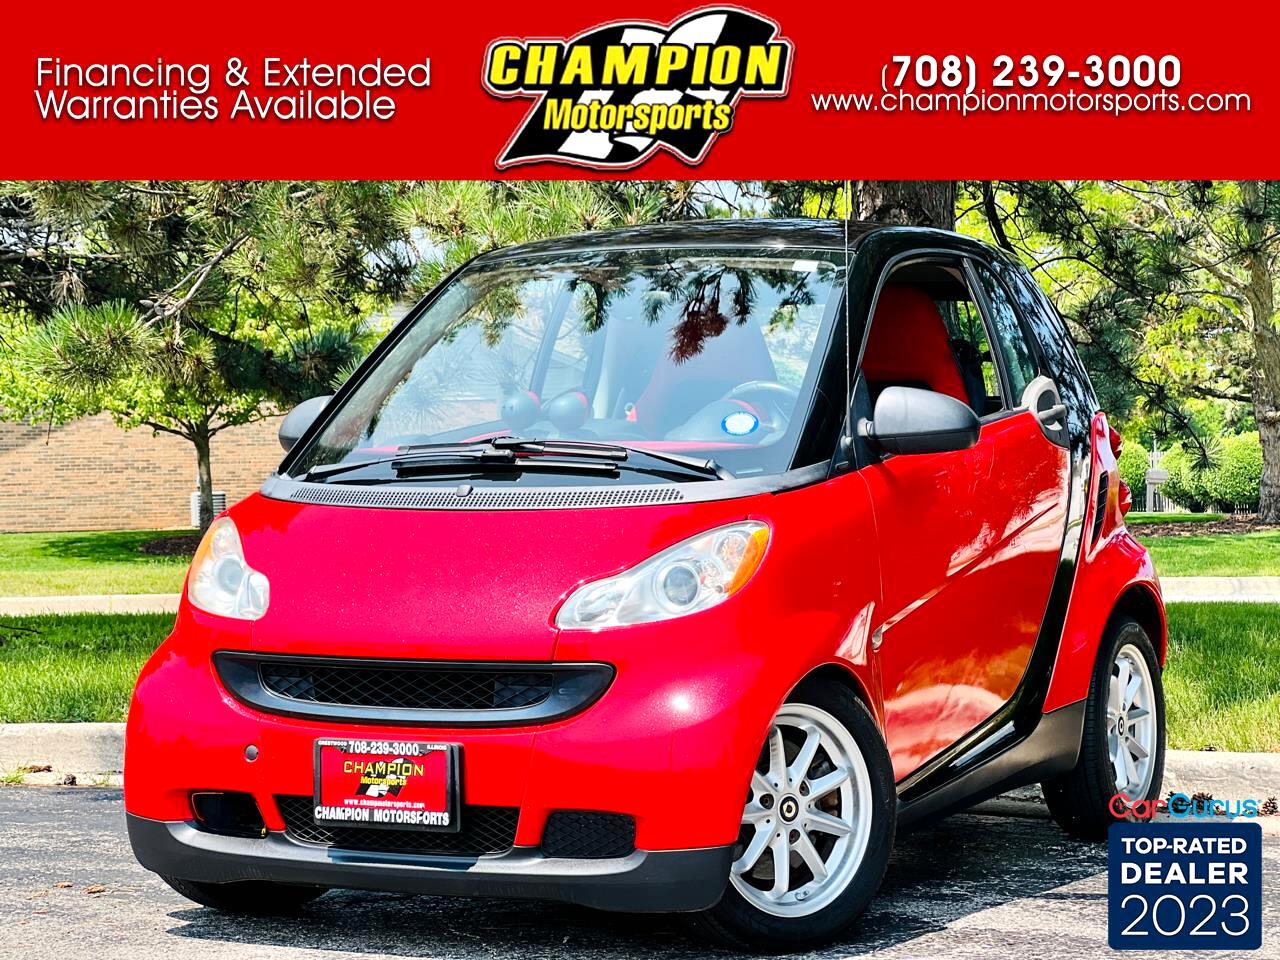 2009 Smart Fortwo 2dr Cpe Passion